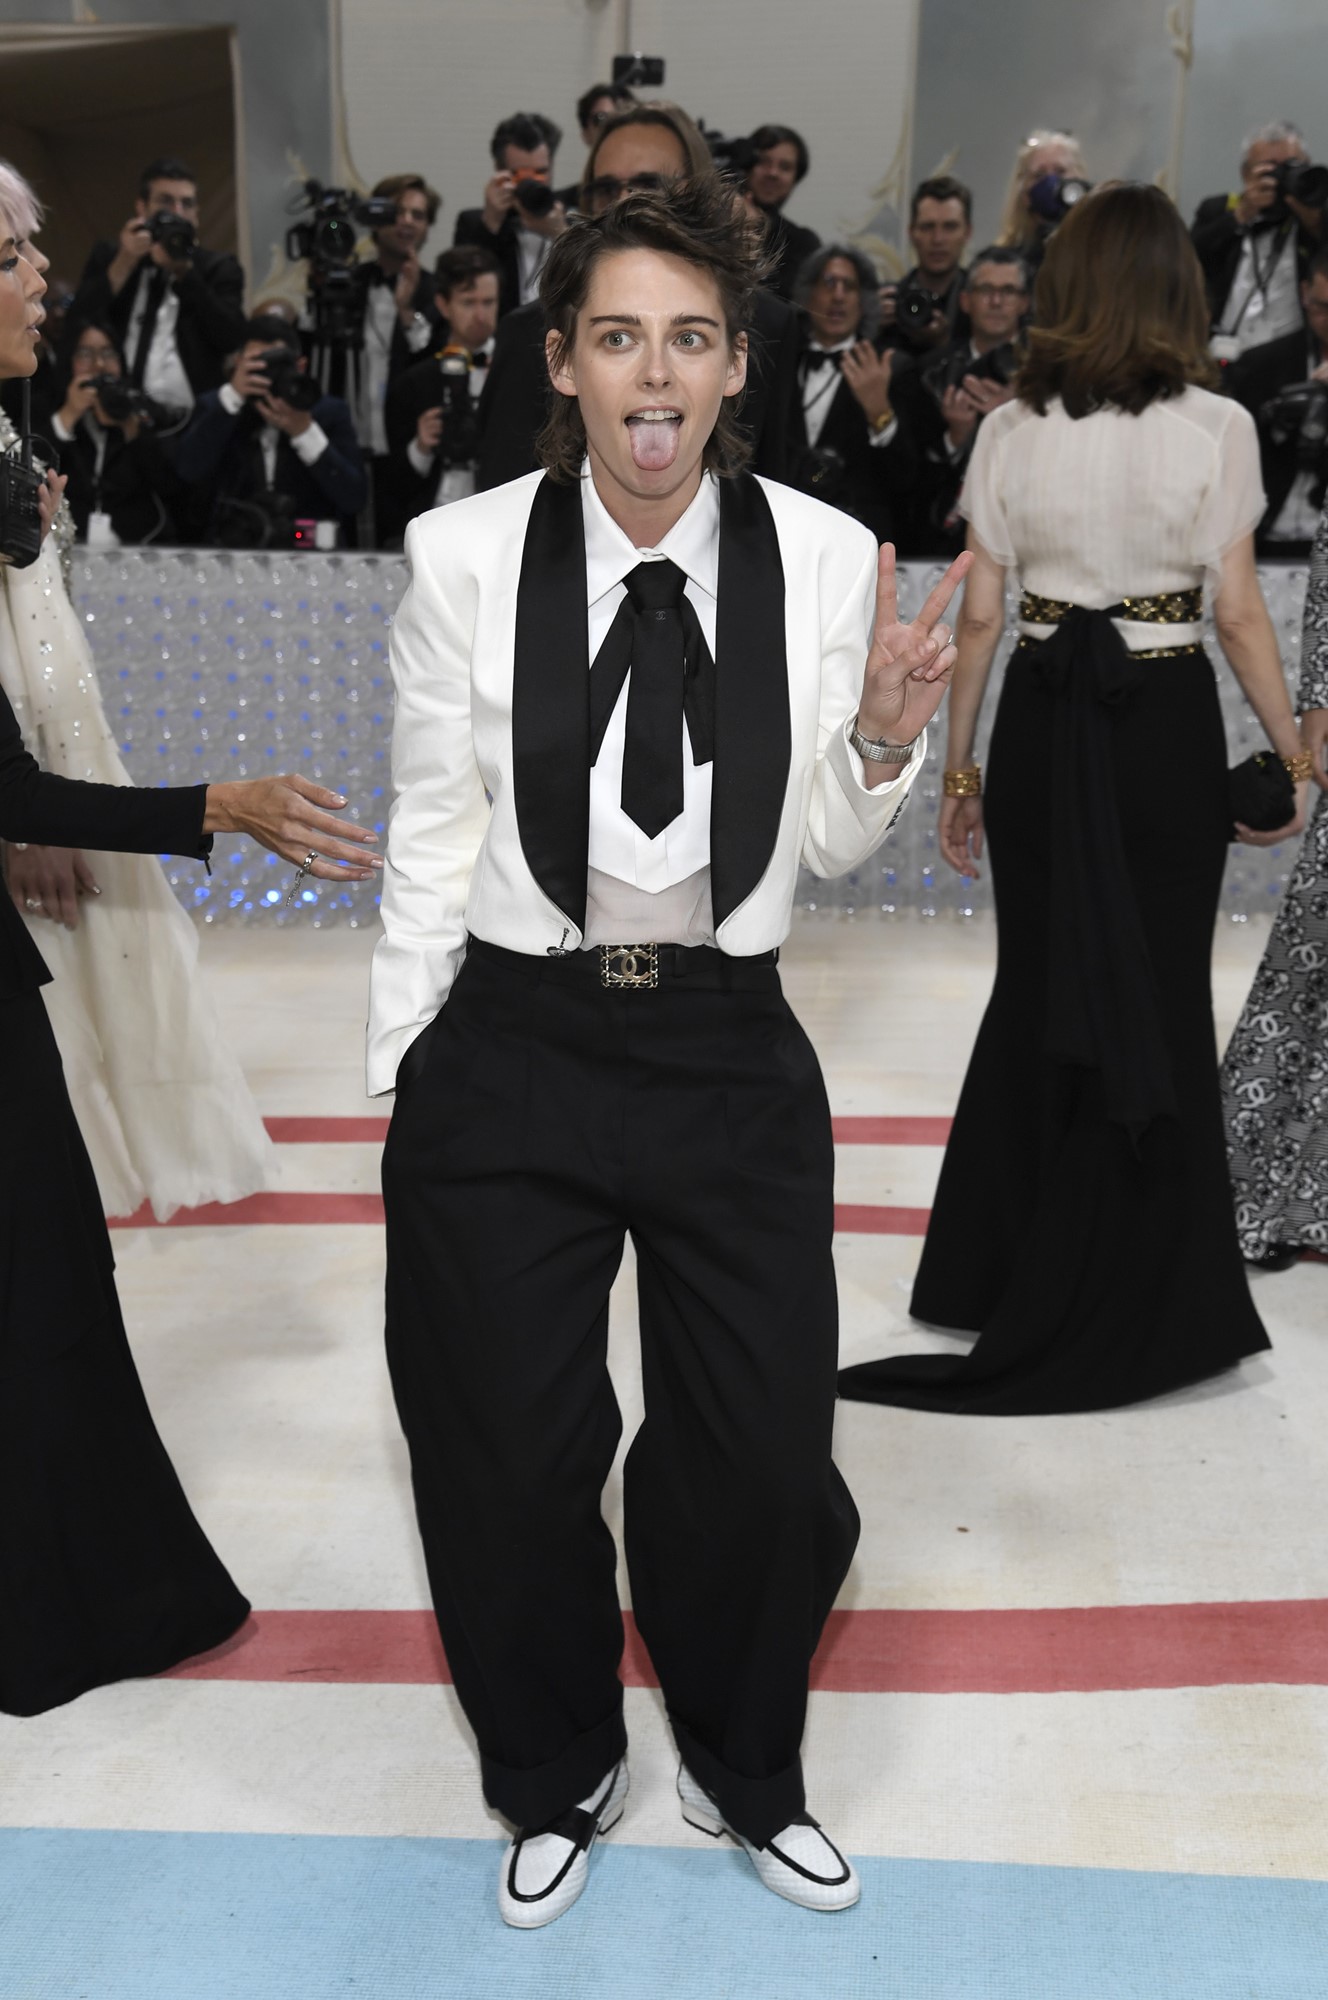 The 'Skinny Arm' and Other Met Ball Poses - ABC News